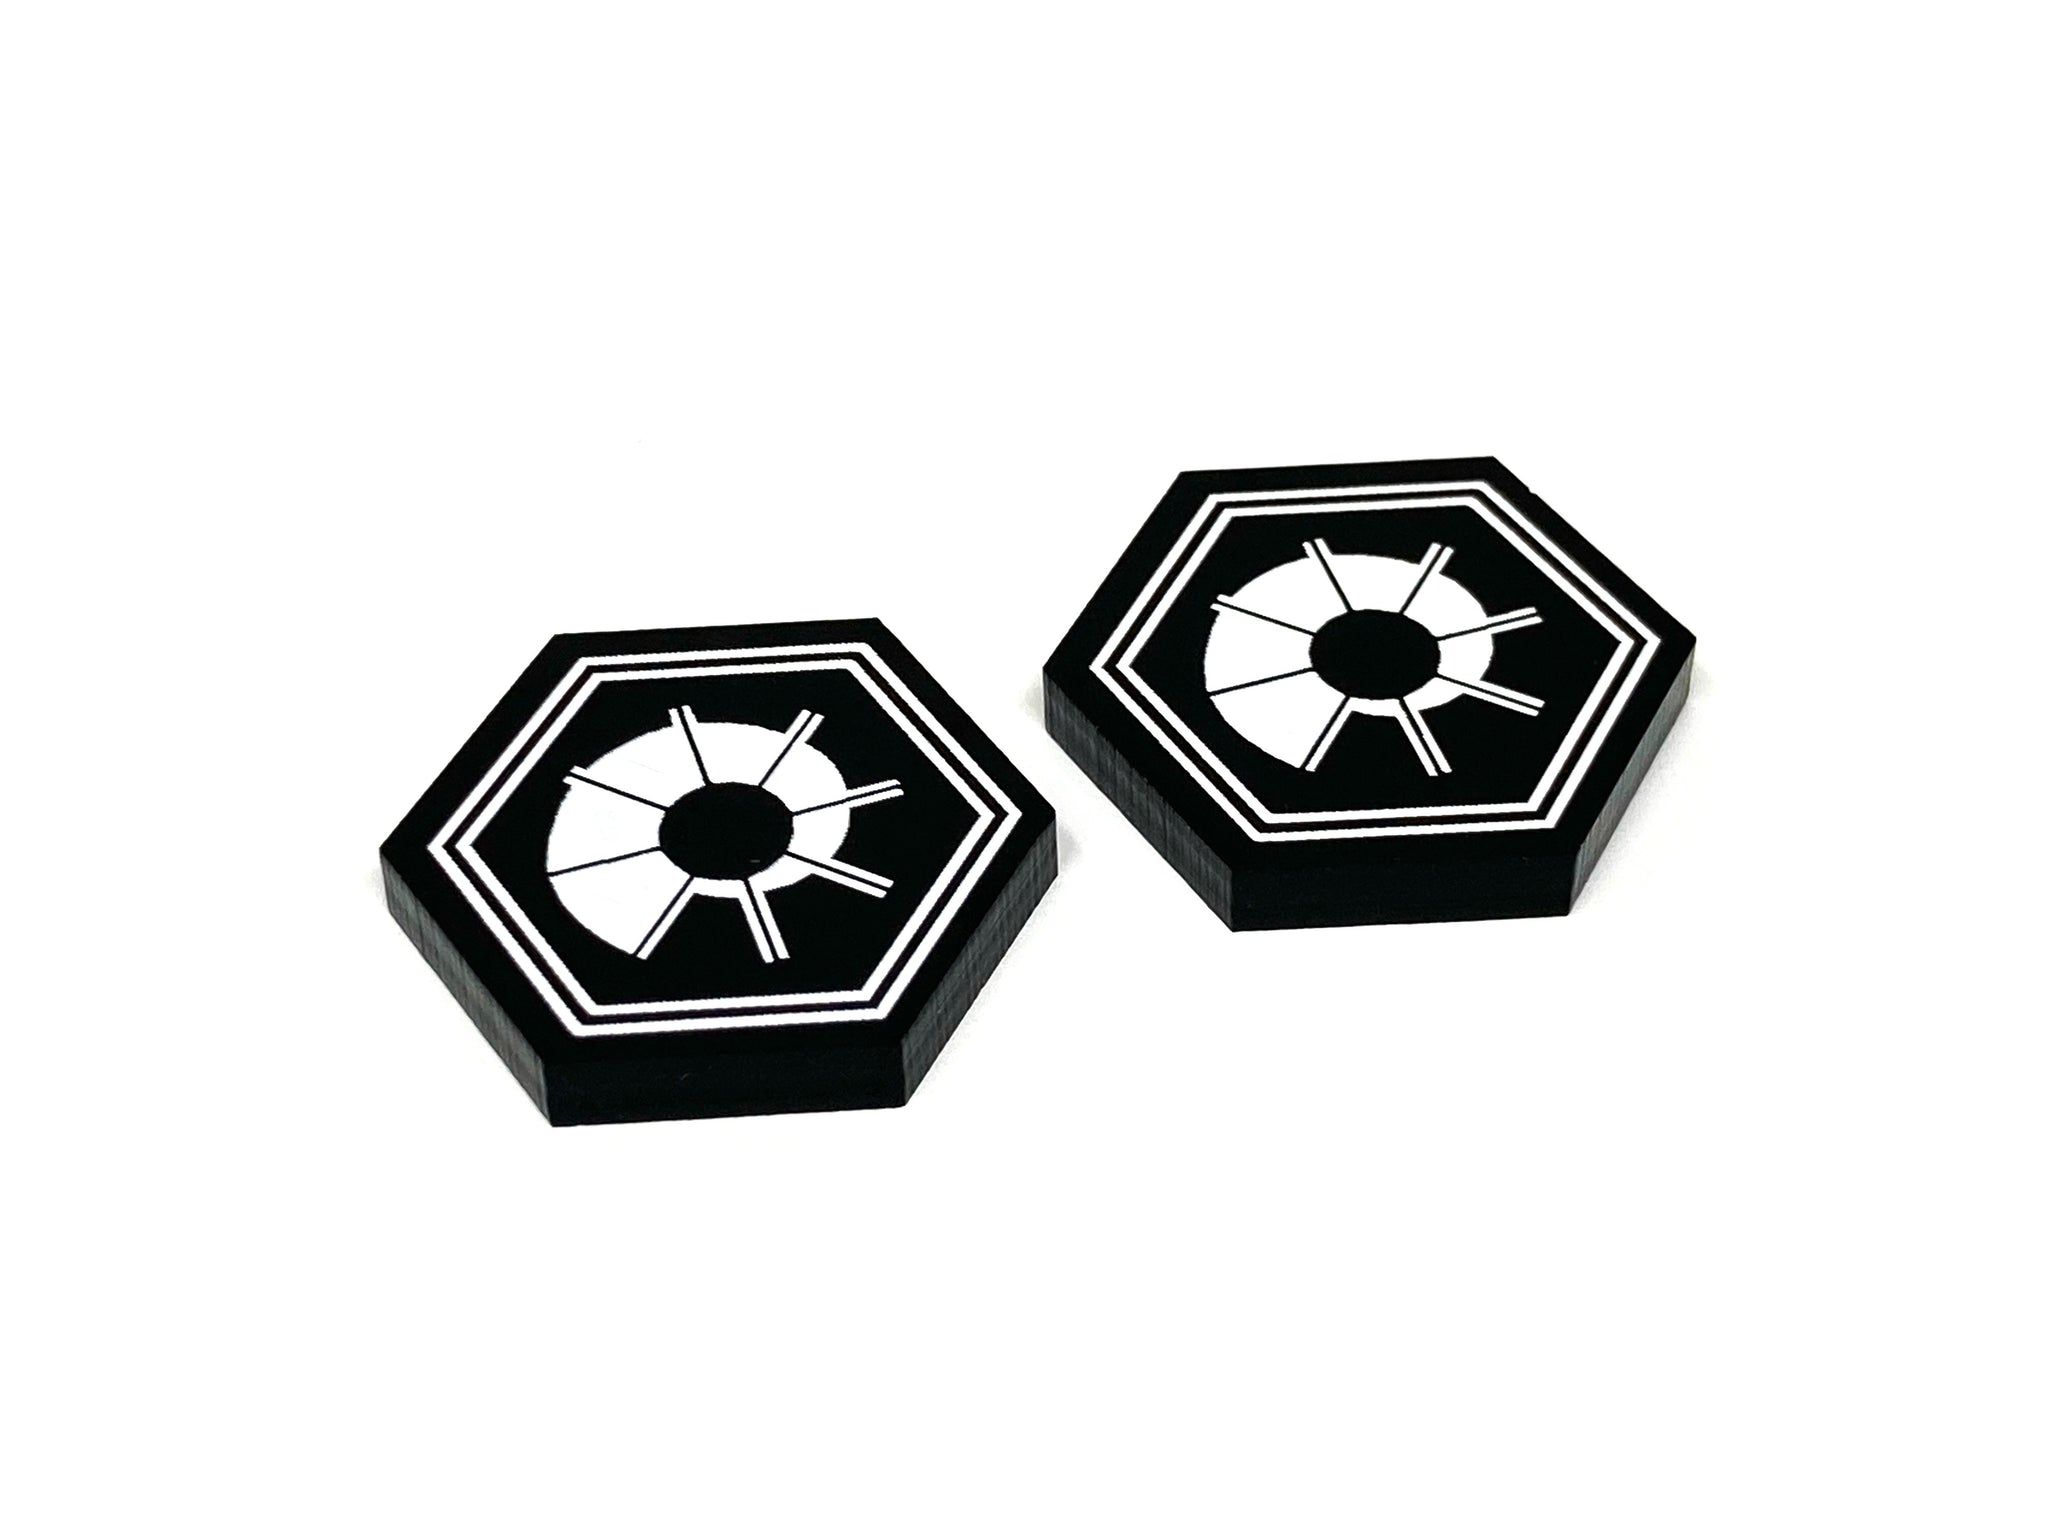 2 x Fuse Tokens - Black Series (Single Sided)